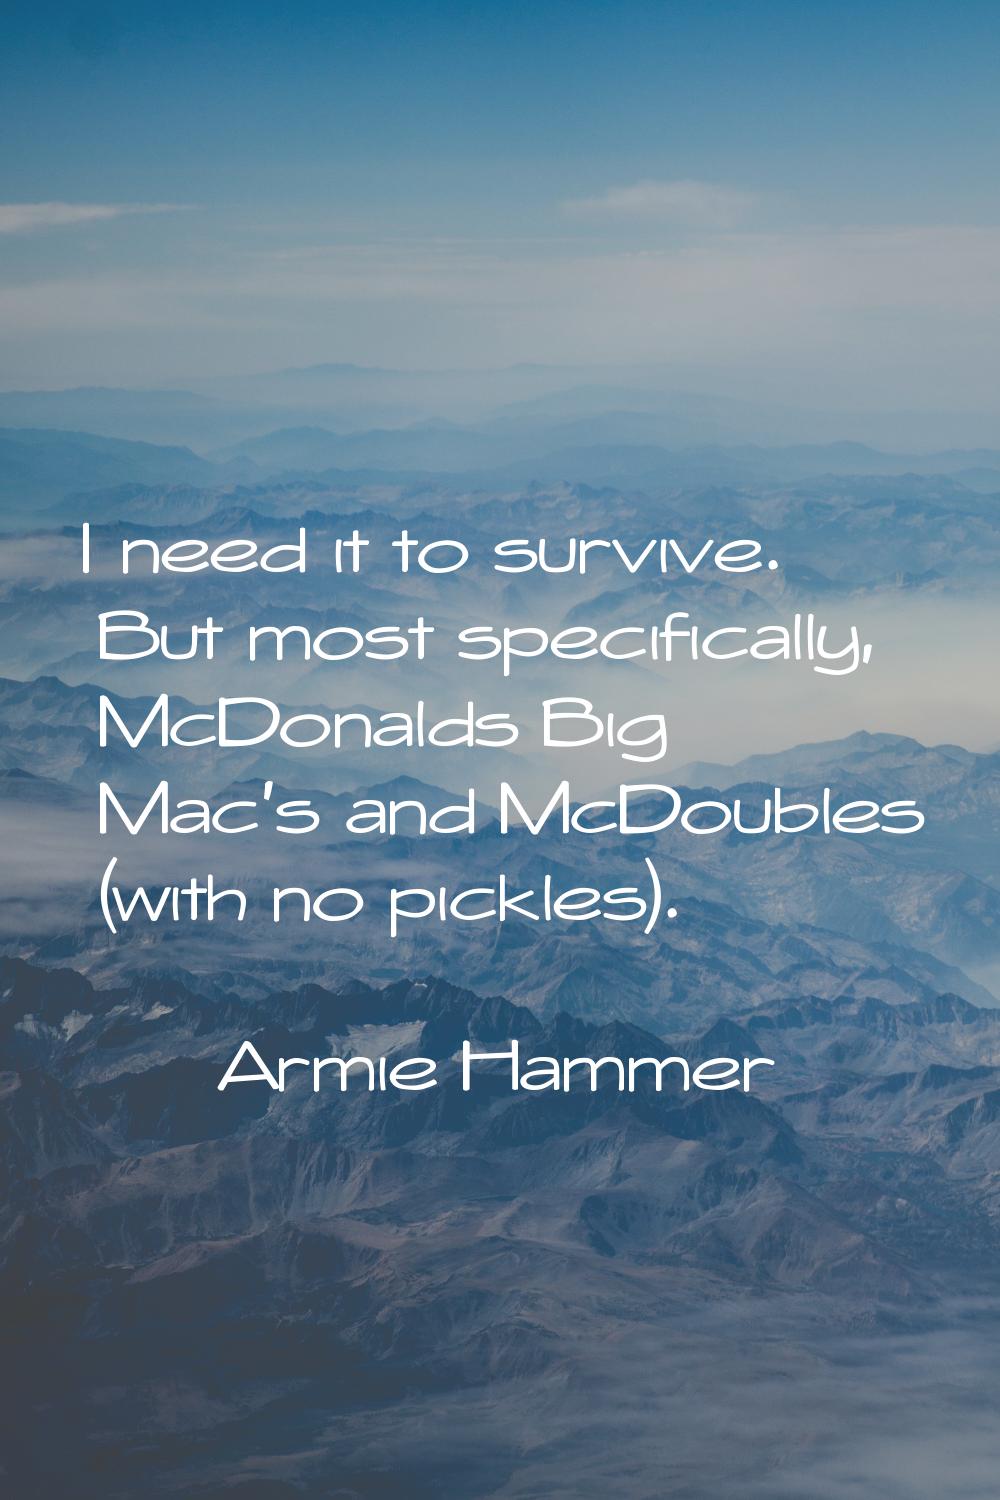 I need it to survive. But most specifically, McDonalds Big Mac's and McDoubles (with no pickles).